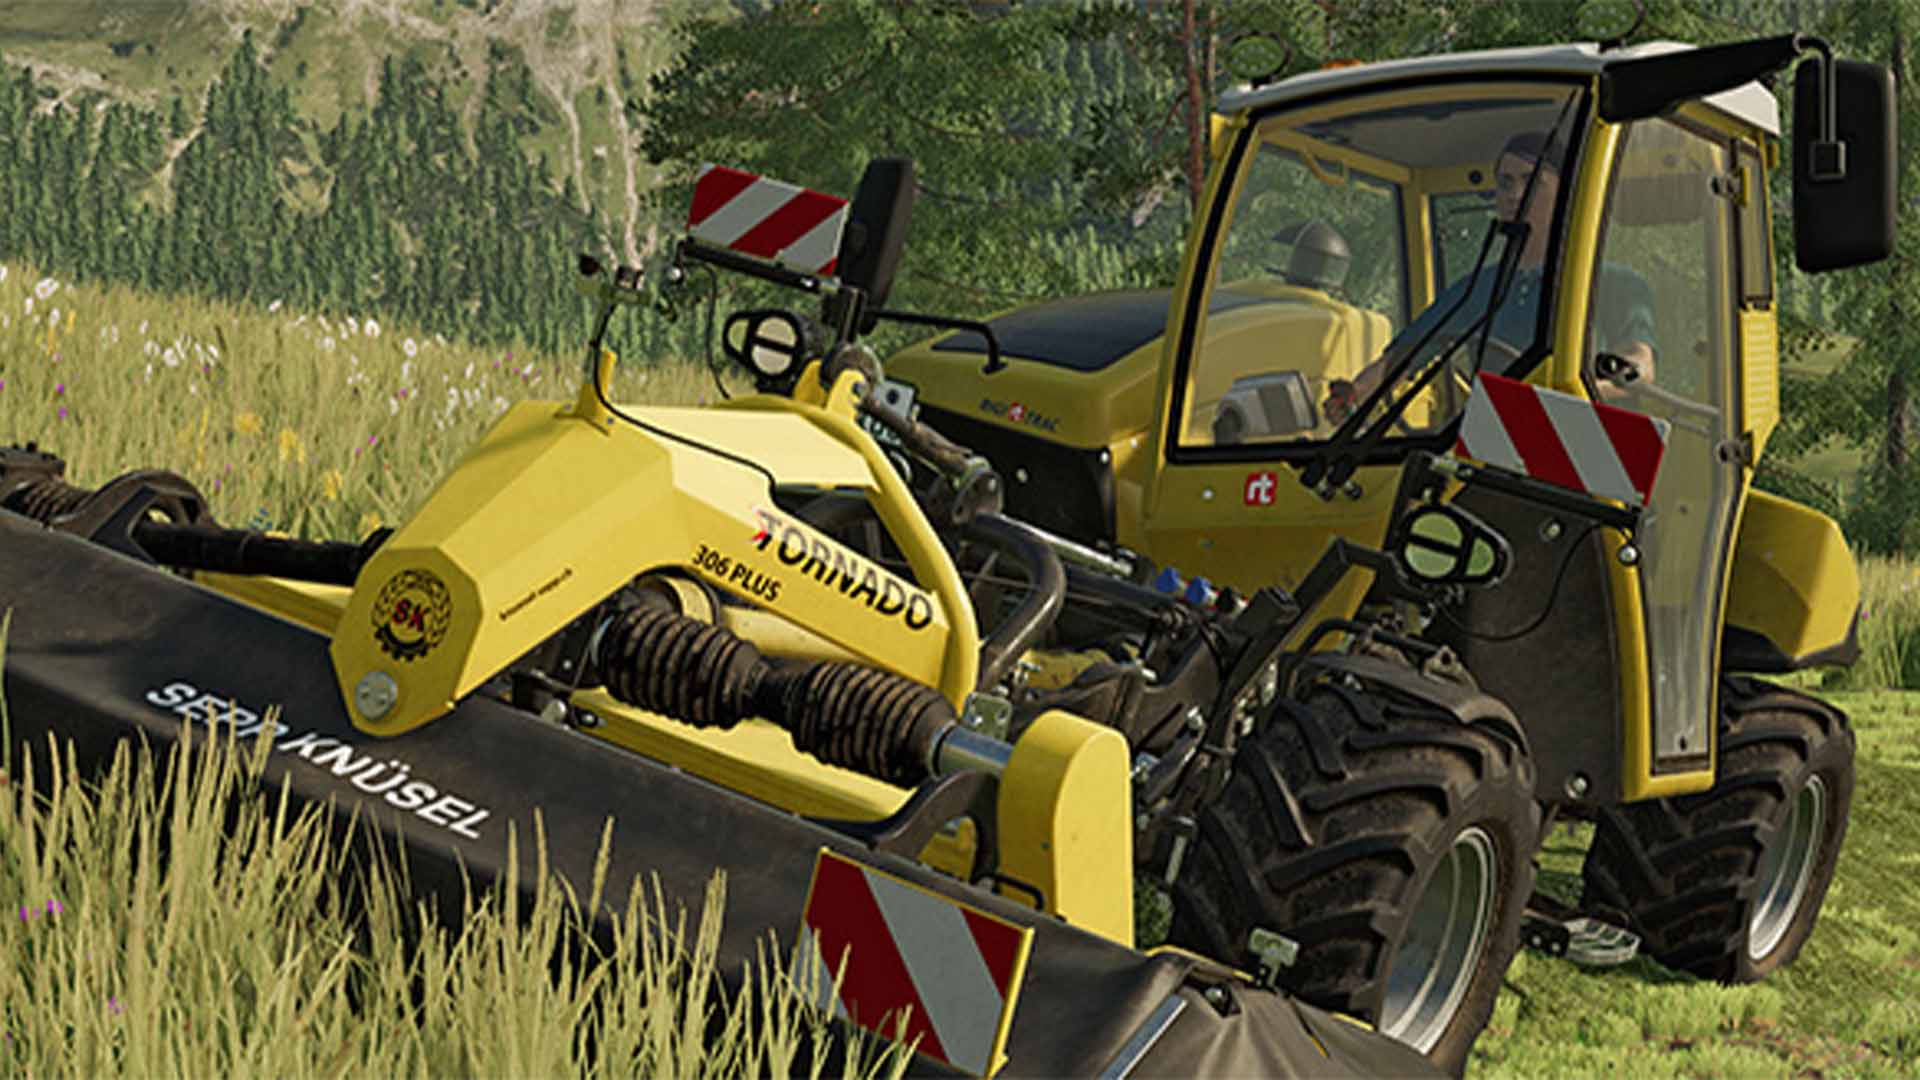 Giants Software Announces Upcoming Farming Simulator 23 for